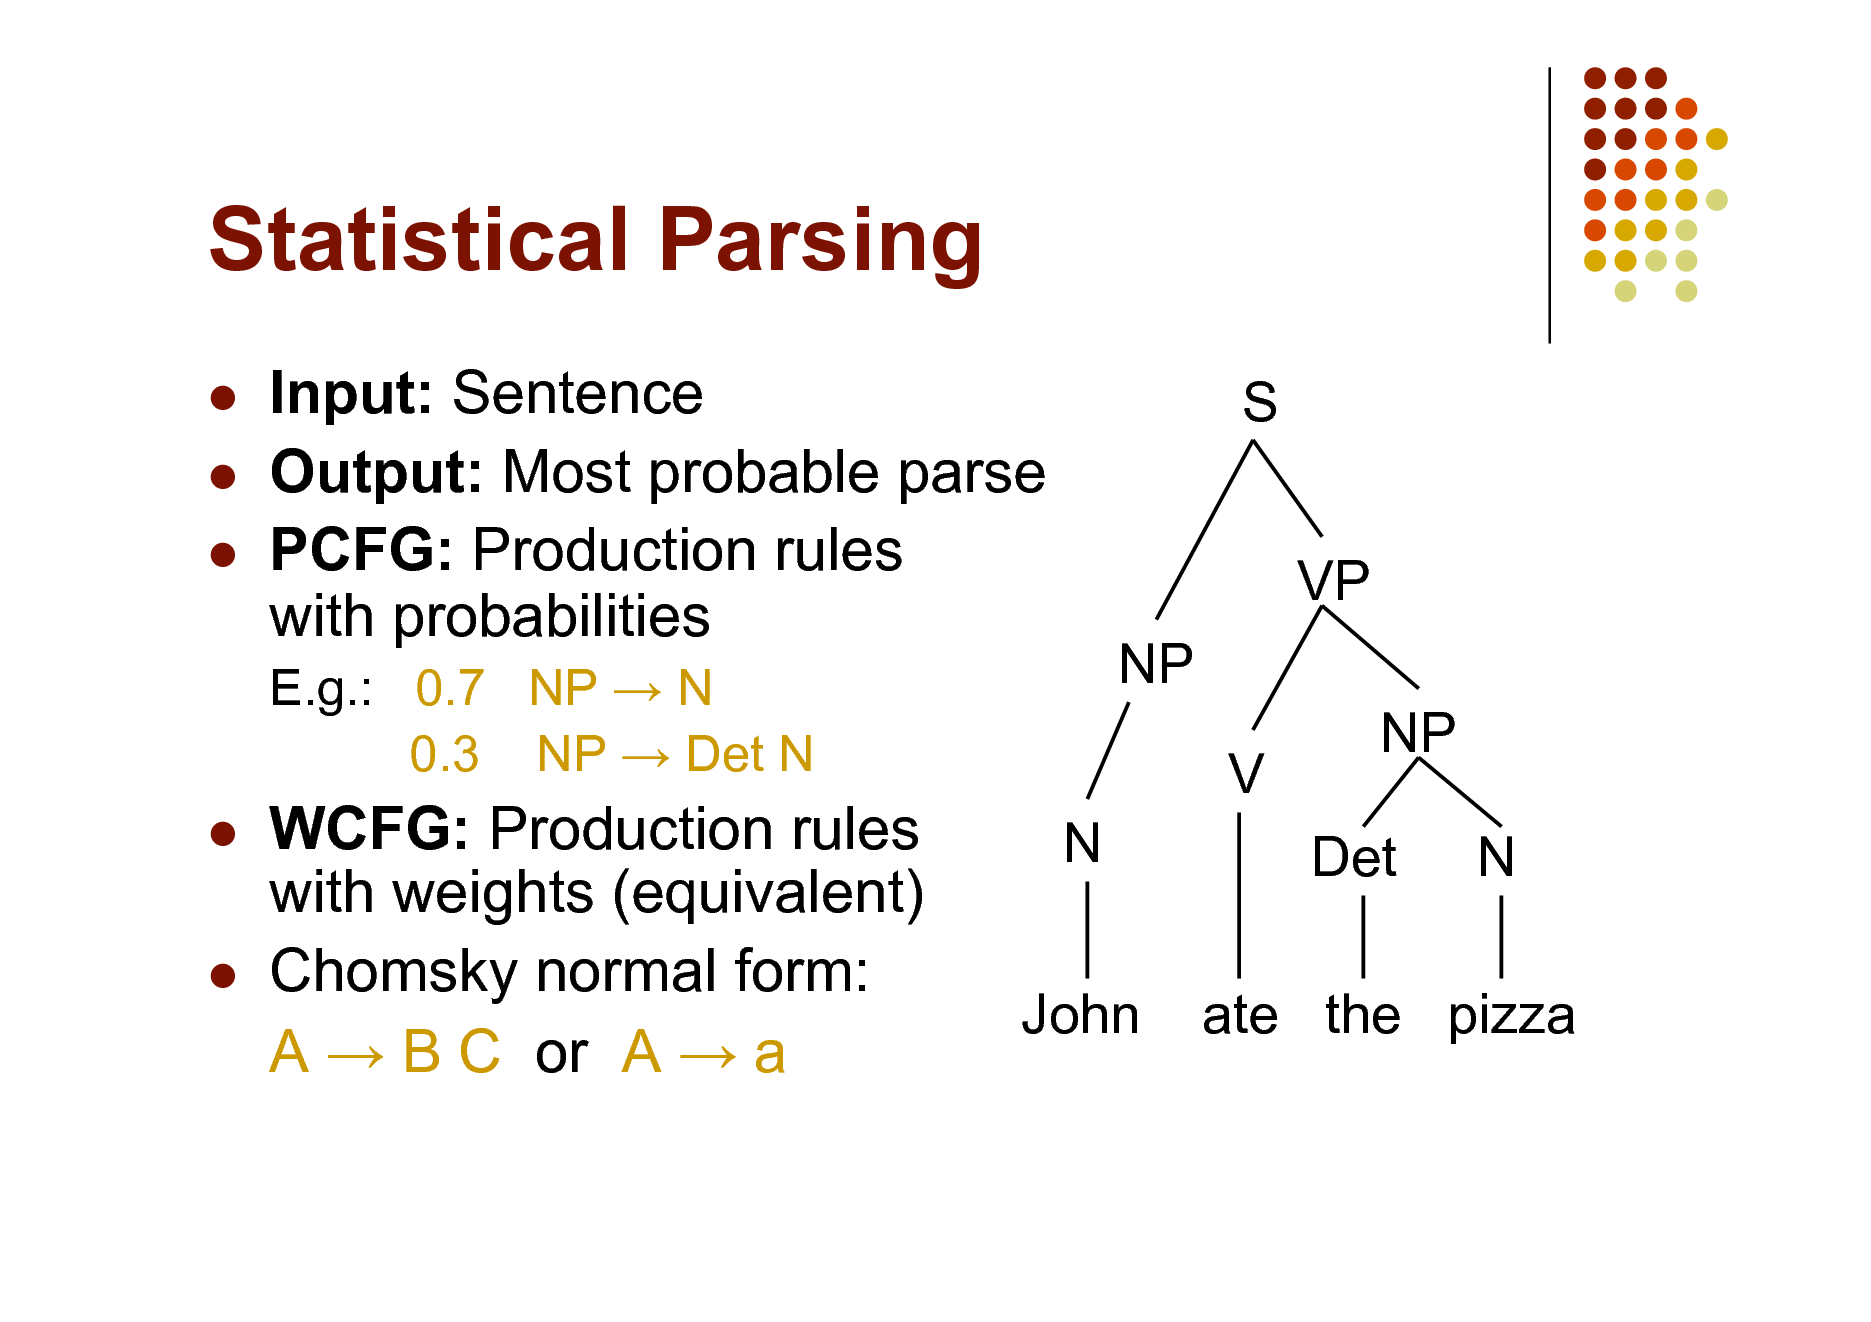 Slide: Statistical Parsing
  

Input: Sentence Output: Most probable parse PCFG: Production rules with probabilities
E.g.: 0.7 NP  N 0.3 NP  Det N

S VP NP V N NP Det N

 

WCFG: Production rules with weights (equivalent) Chomsky normal form: A  B C or A  a

John

ate the pizza

